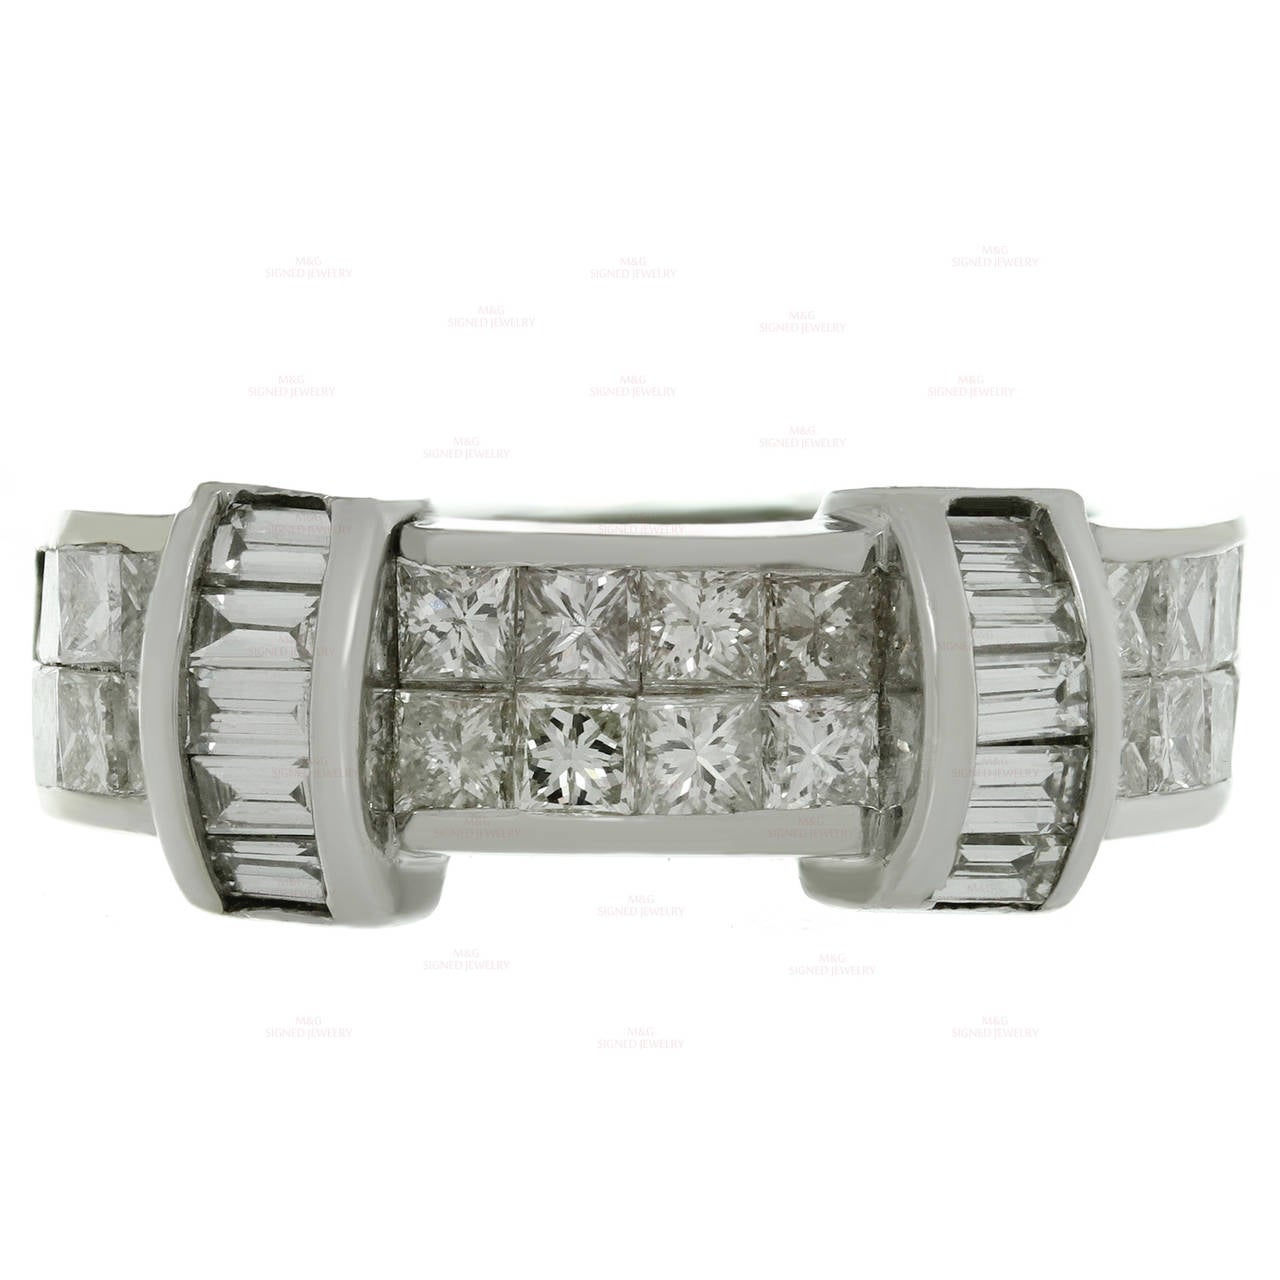 This classic estate ring is crafted in 18k white gold and beautifully set with 10 baguette-cut diamonds of an estimated 0.35 carats and 24 princess-cut diamonds of an estimated 1.65 carats.  Measurements: 0.31